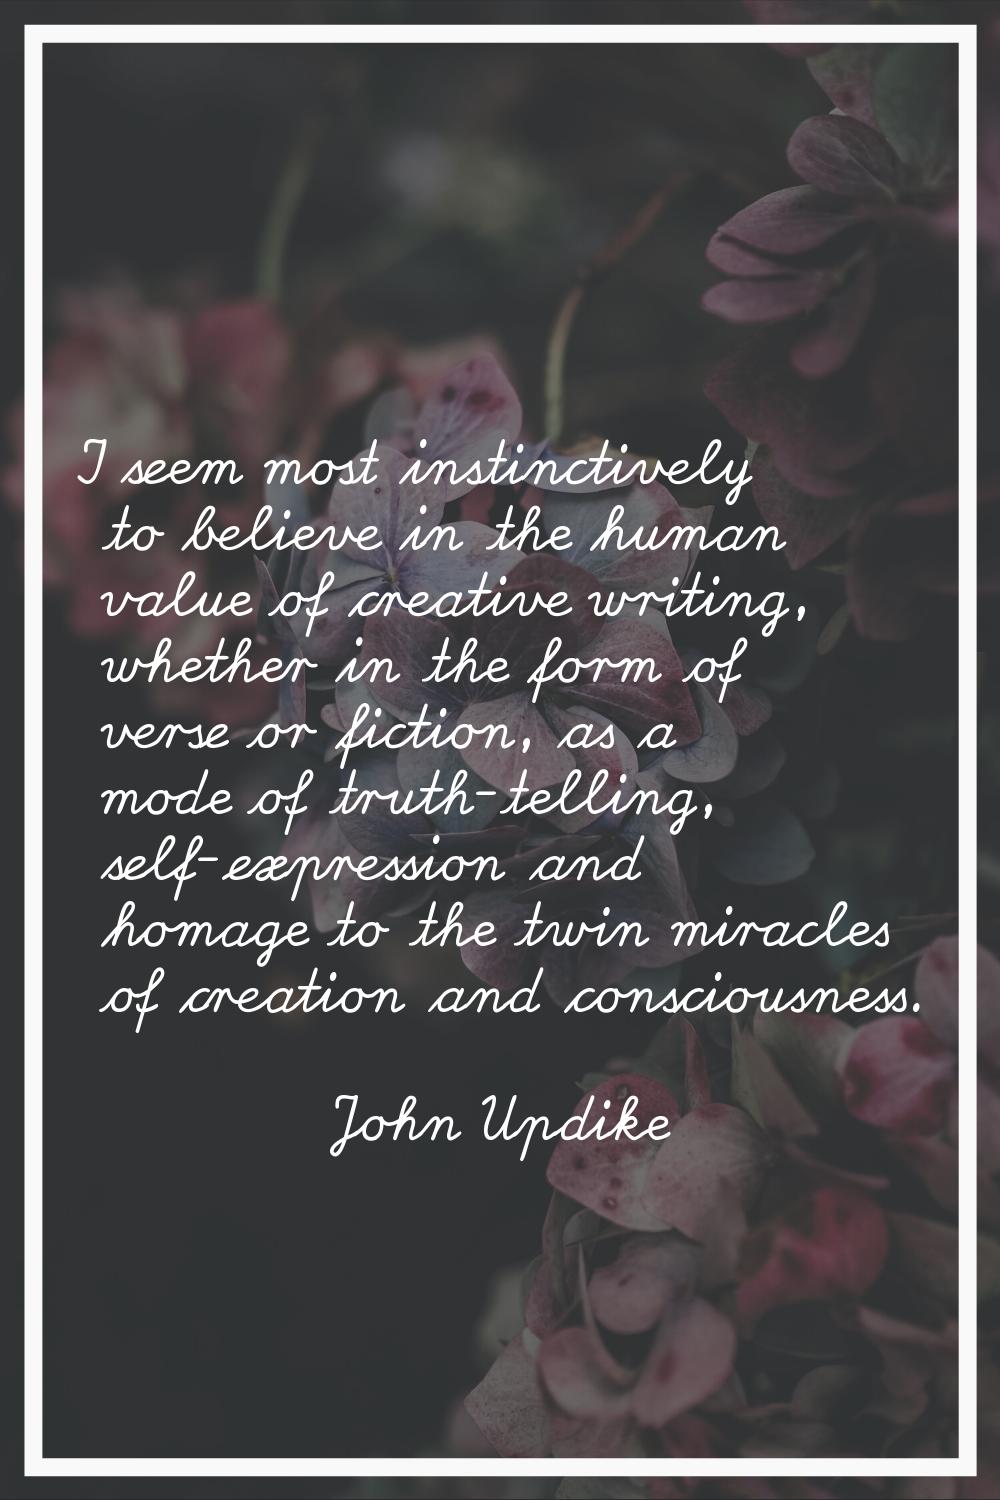 I seem most instinctively to believe in the human value of creative writing, whether in the form of